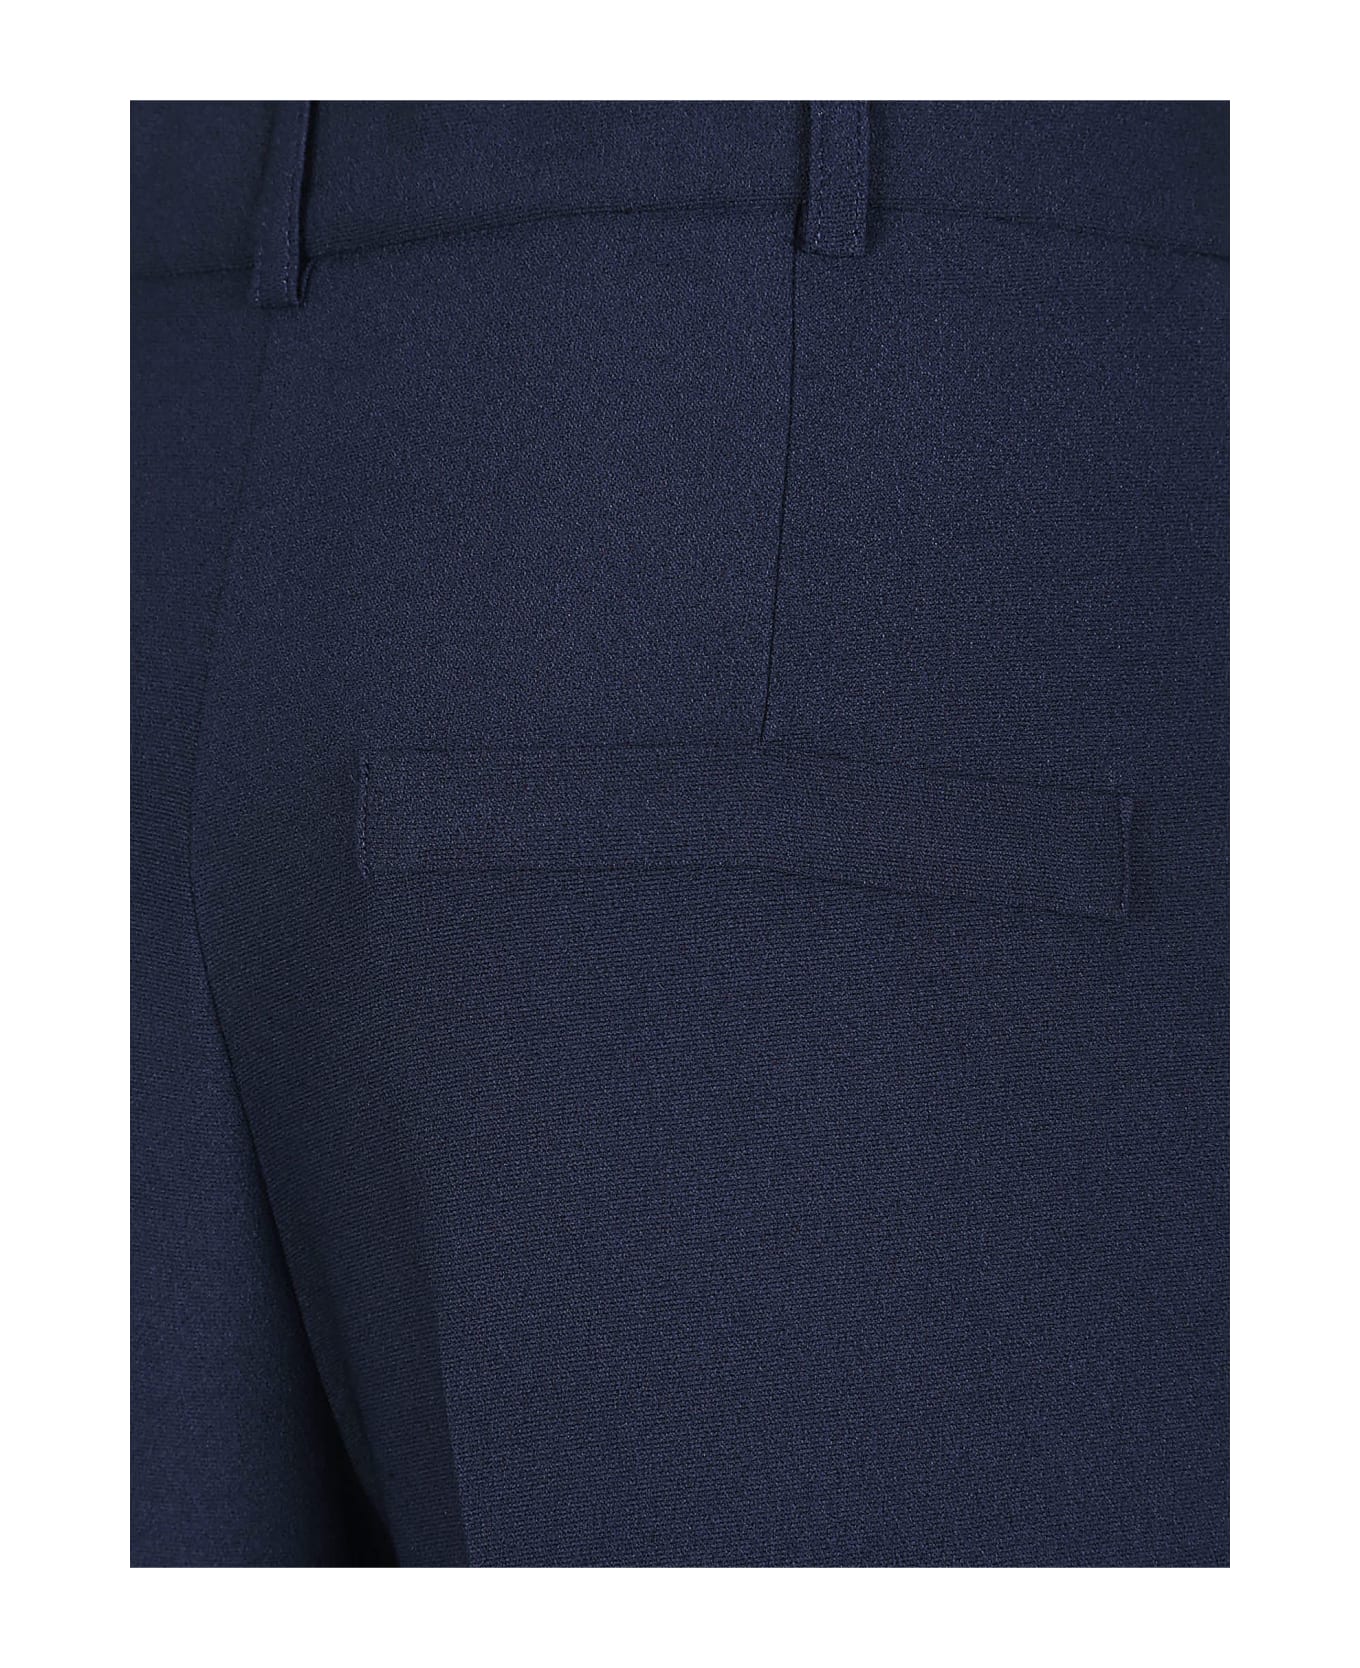 Hebe Studio Trousers Blue - Blue ボトムス